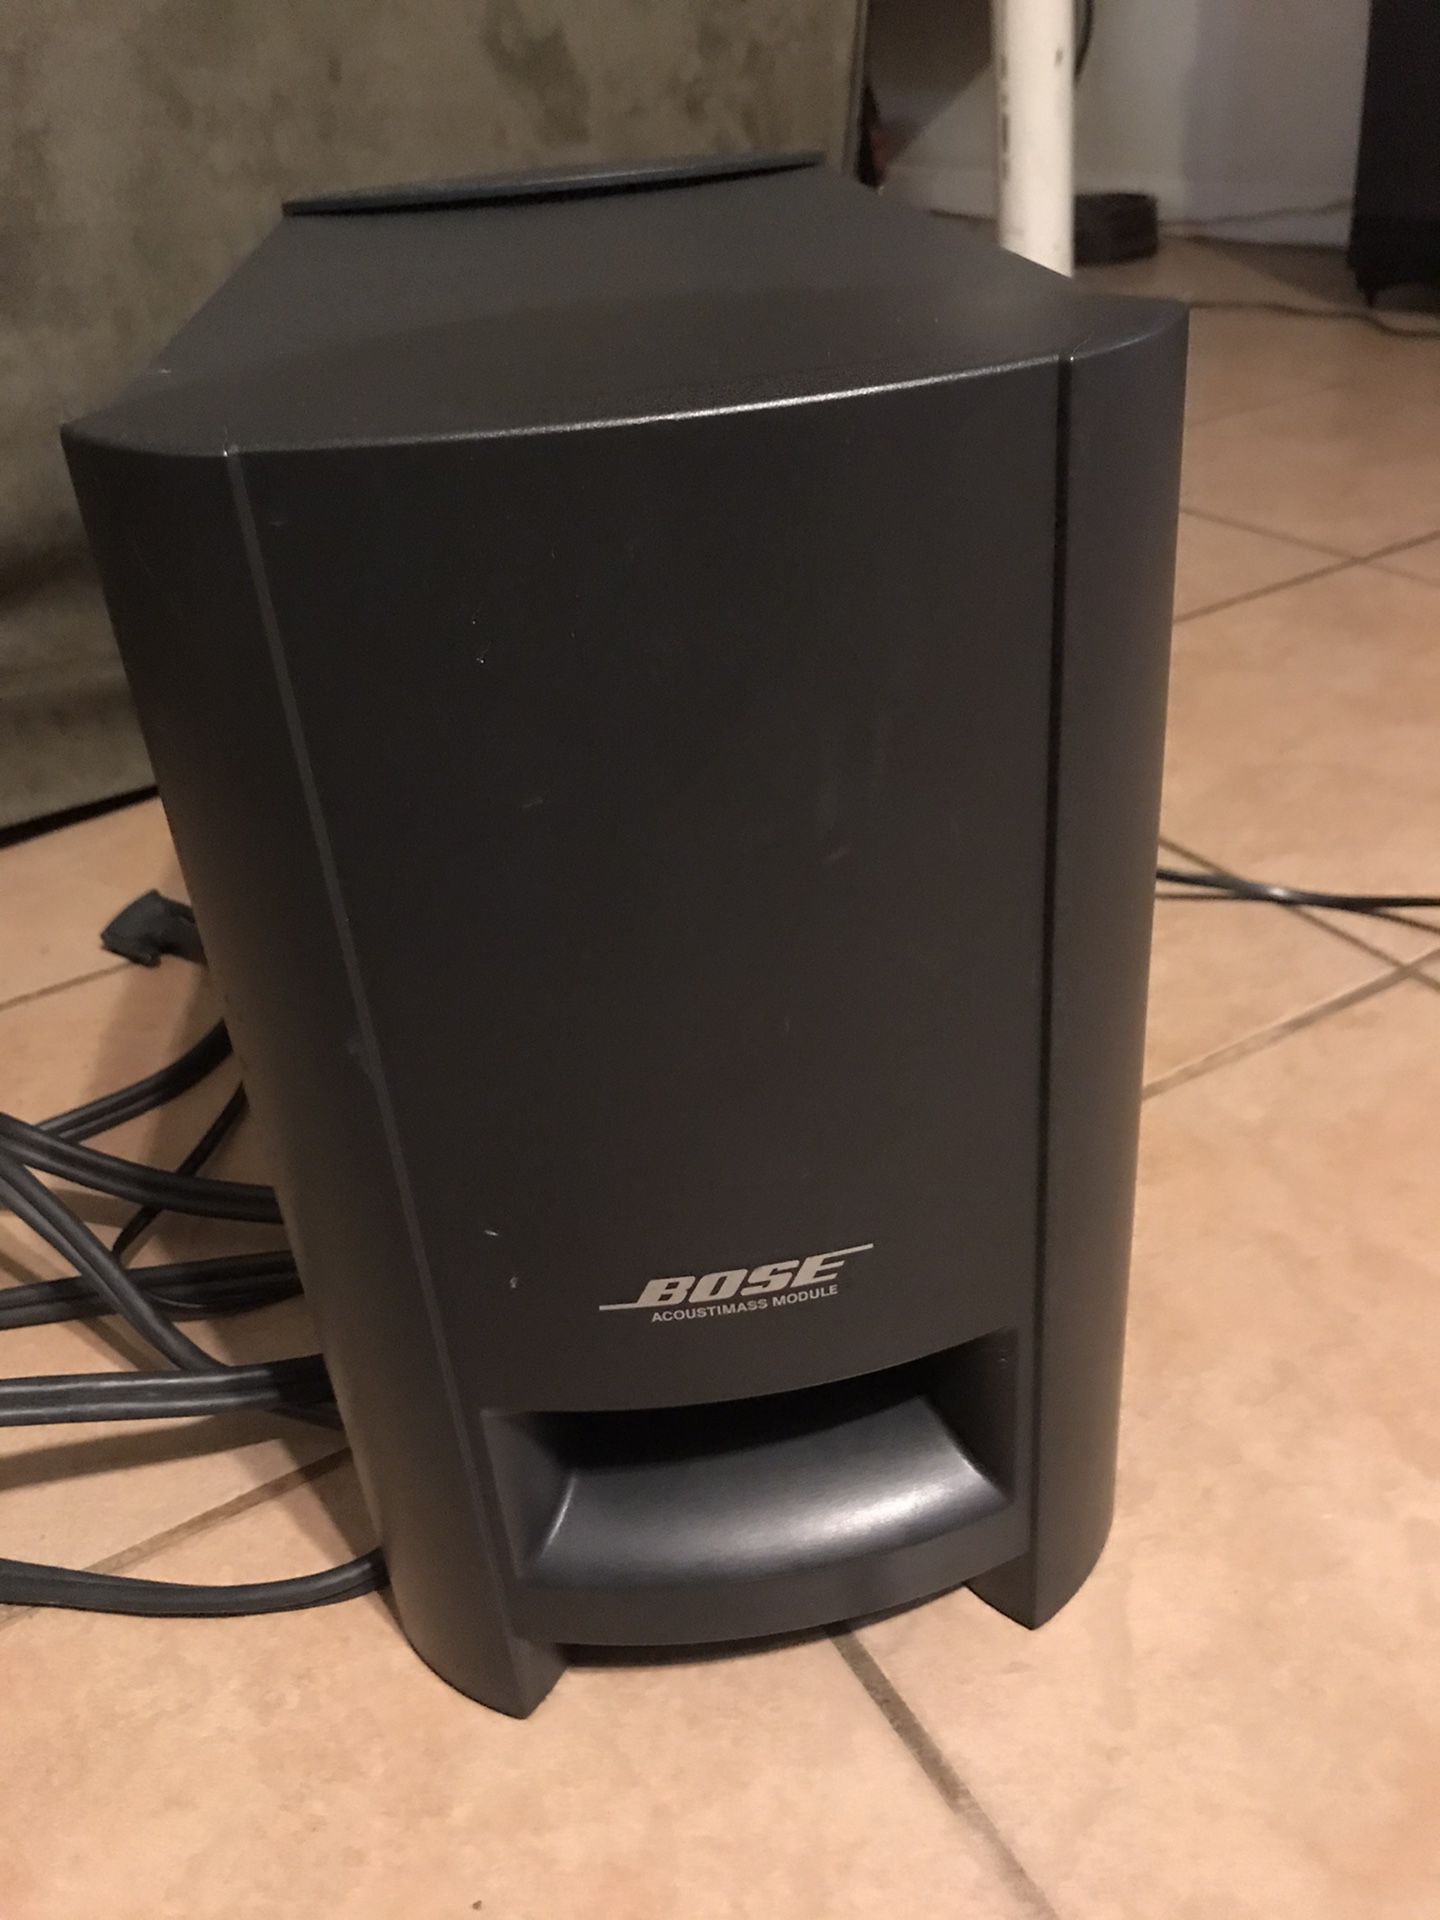 Bose 321 powered subwoofer and satellite speakers